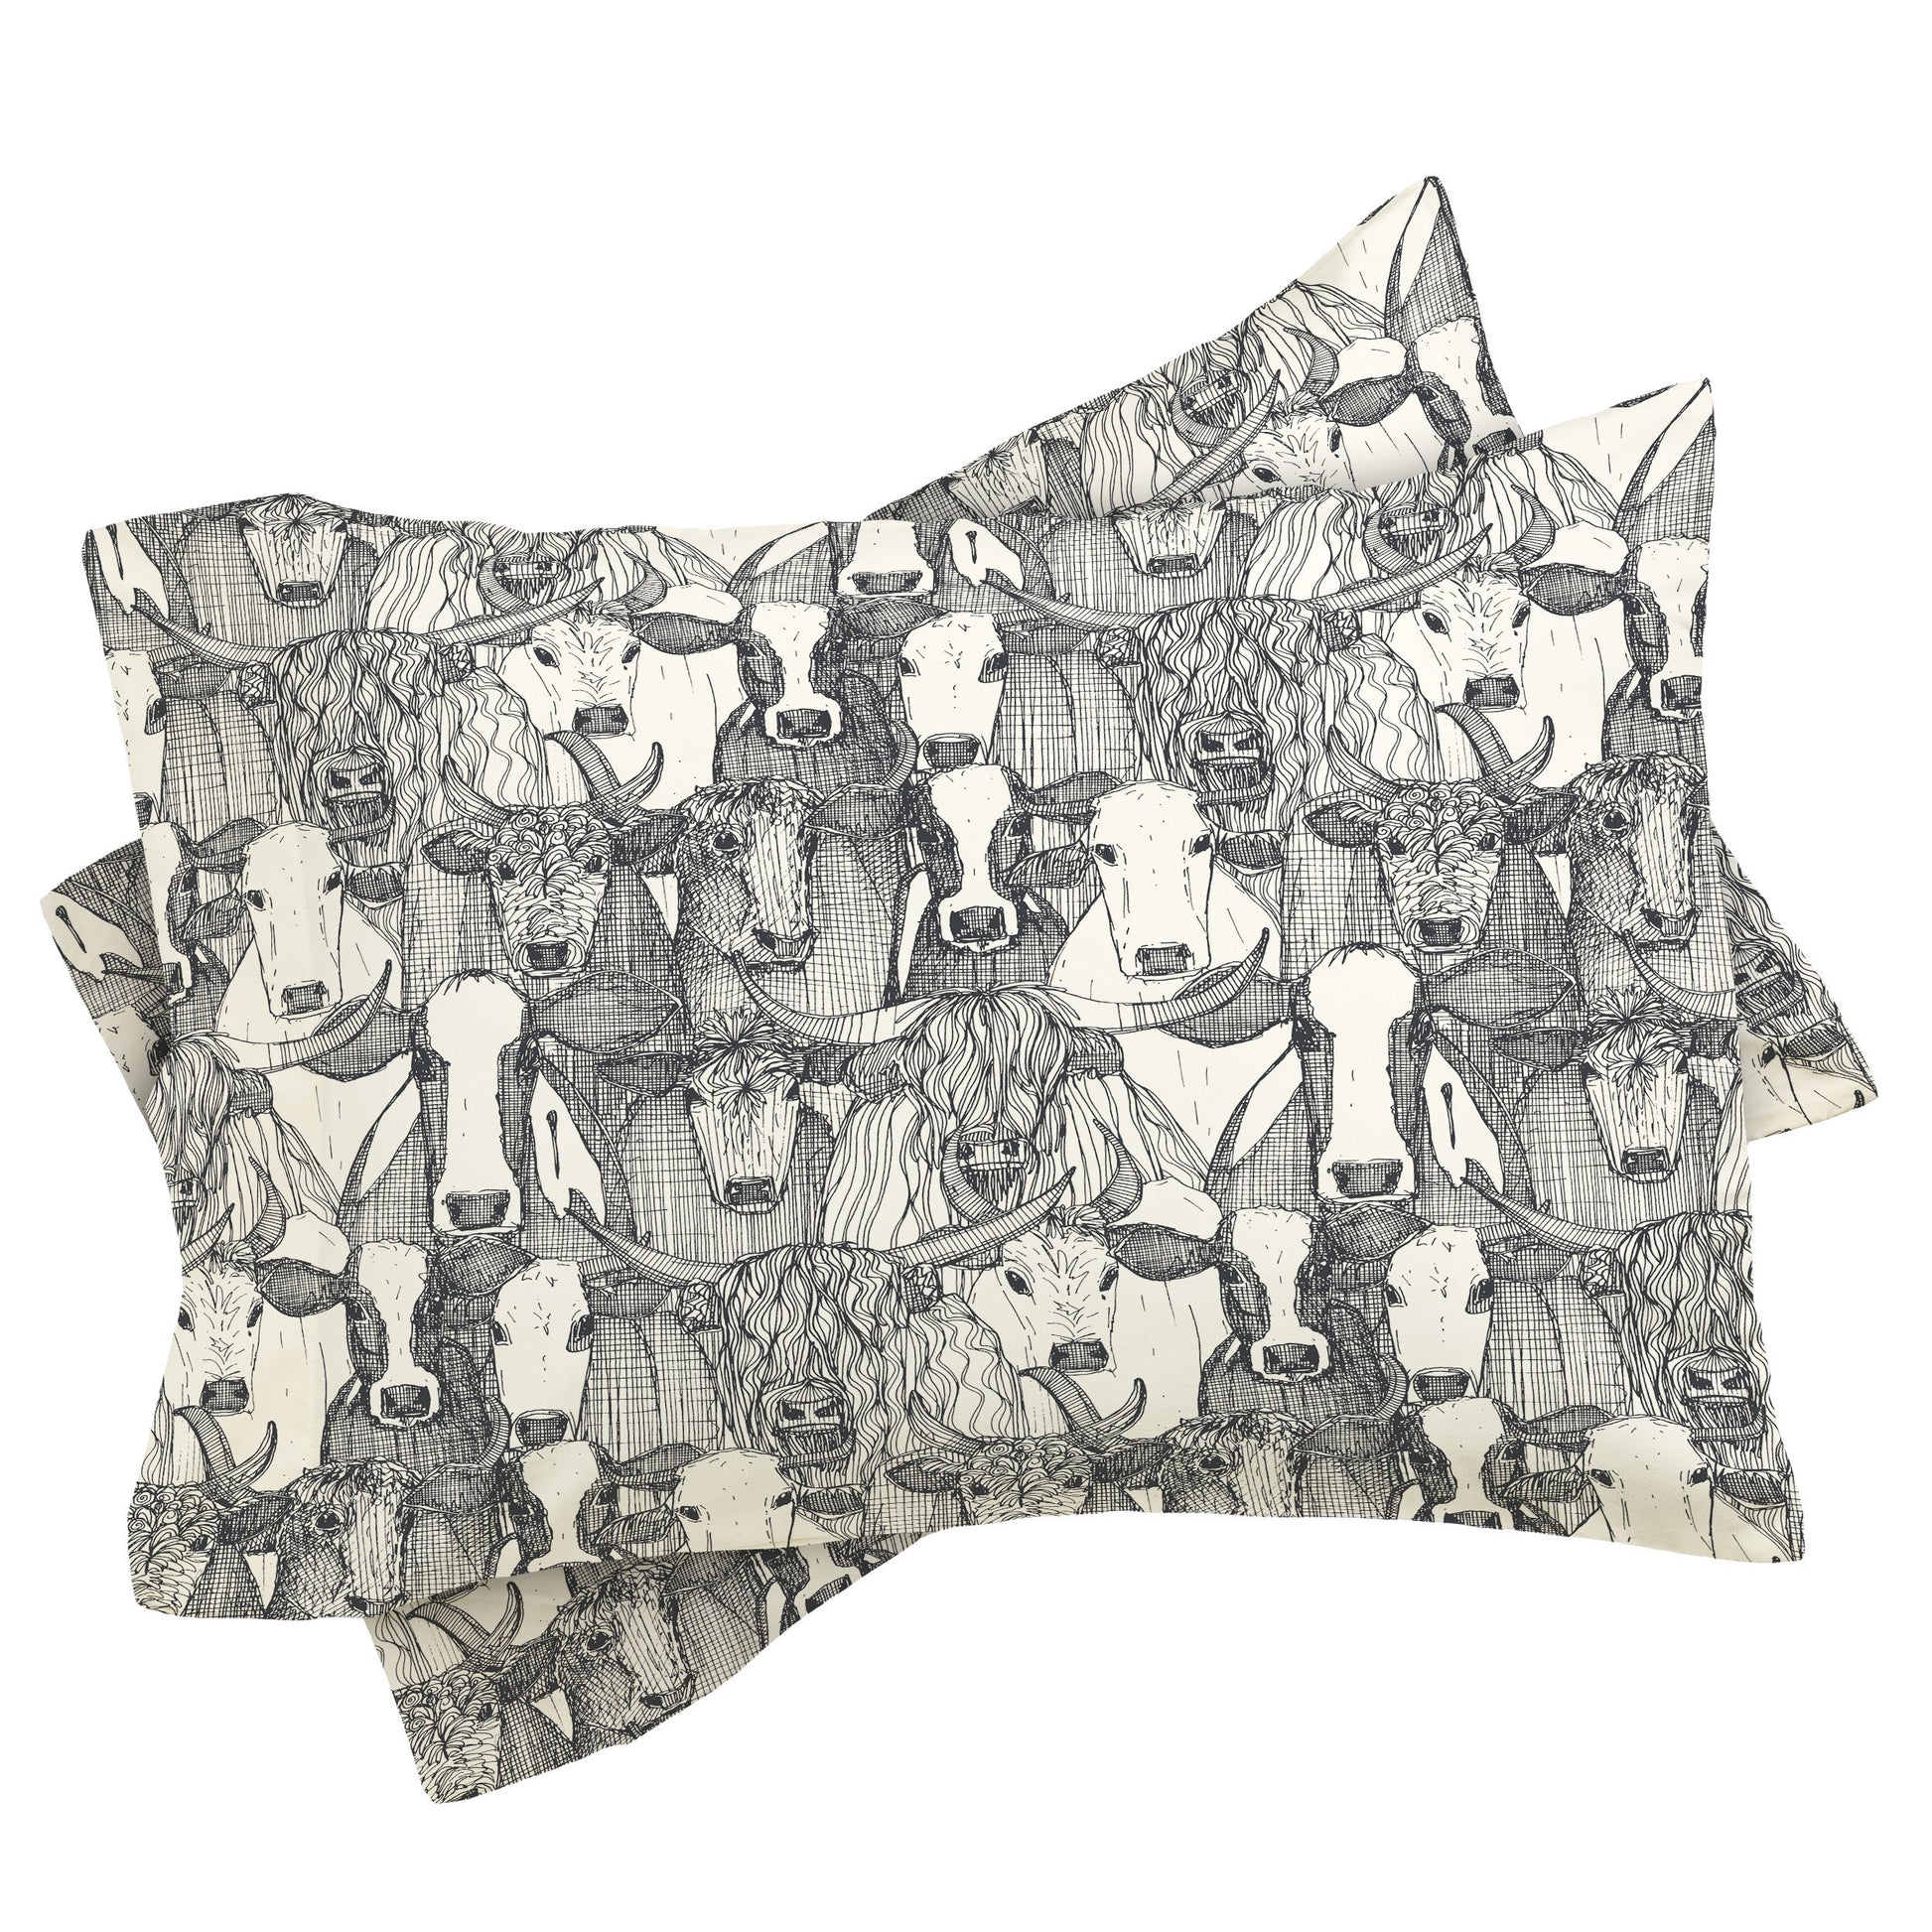 All Cows Bed In A Bag - bed in a bag, bedding, bedroom, blanket, comforter, cow, cow print, cowboybedroom, cowfarm, cowgirl, Cowprint, cowr, cows, cowss, cowws, cute cows, decor, duvet cover, farm, farmgirl, home, home decor, homedecor, pillow sham, ranch, southwesterndecor, southwesternhome, southwesternhomedecor, wesern, western, western decor, western home decor, westernbedding, westerndecor, westernhomedecor -  - Baha Ranch Western Wear